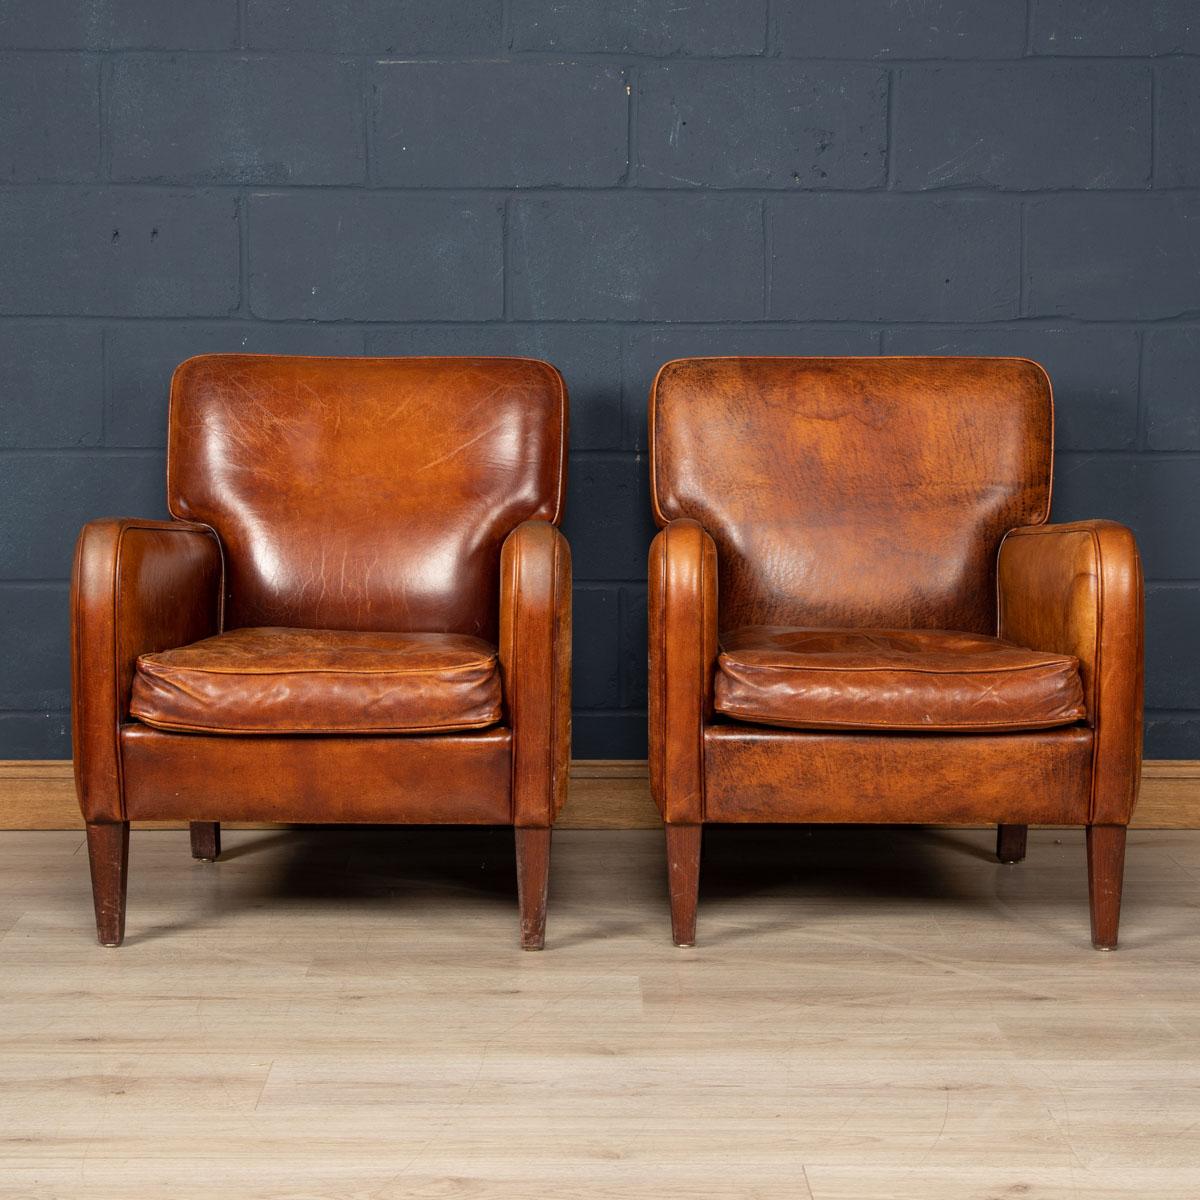 Showing superb patina and colour, this wonderful pair of club chairs were hand upholstered sheepskin leather in Holland by the finest craftsmen in the latter part of the 20th century.

Condition
In Good Condition - some wear consistent with